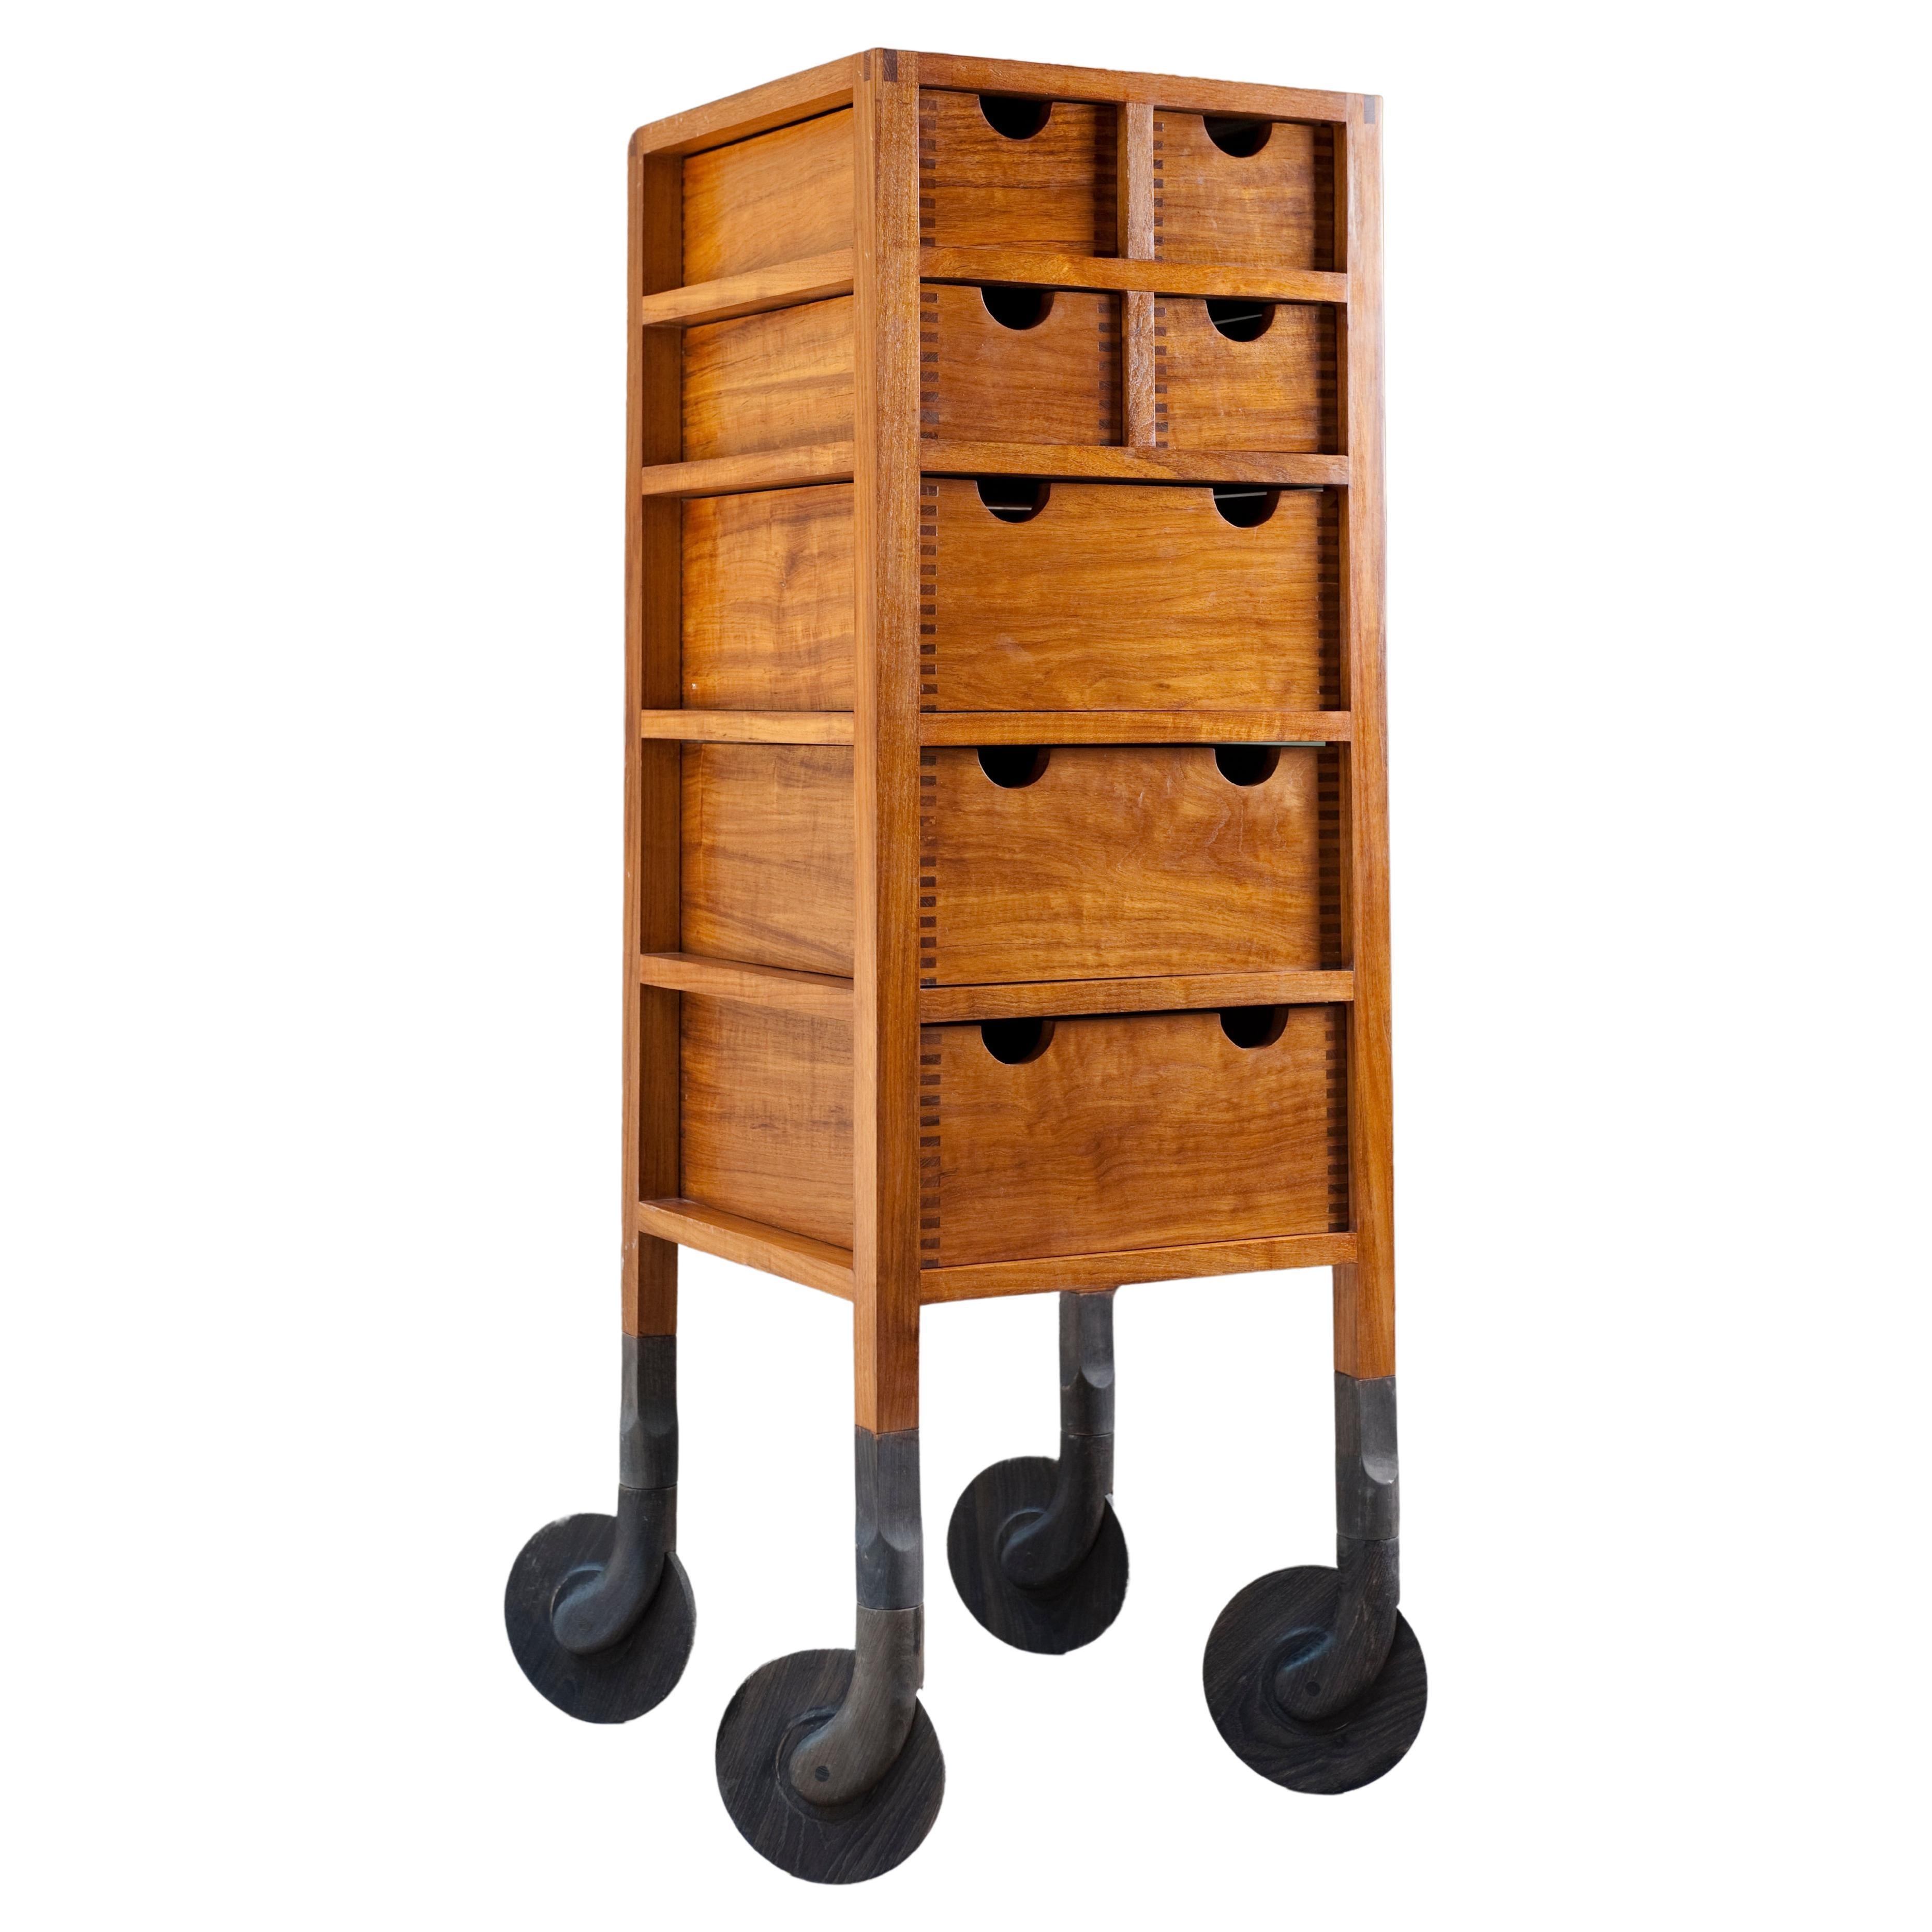 AKMD Rolling Dresser 'High, Dark Wood' all solid wood with wooden casters/wheels